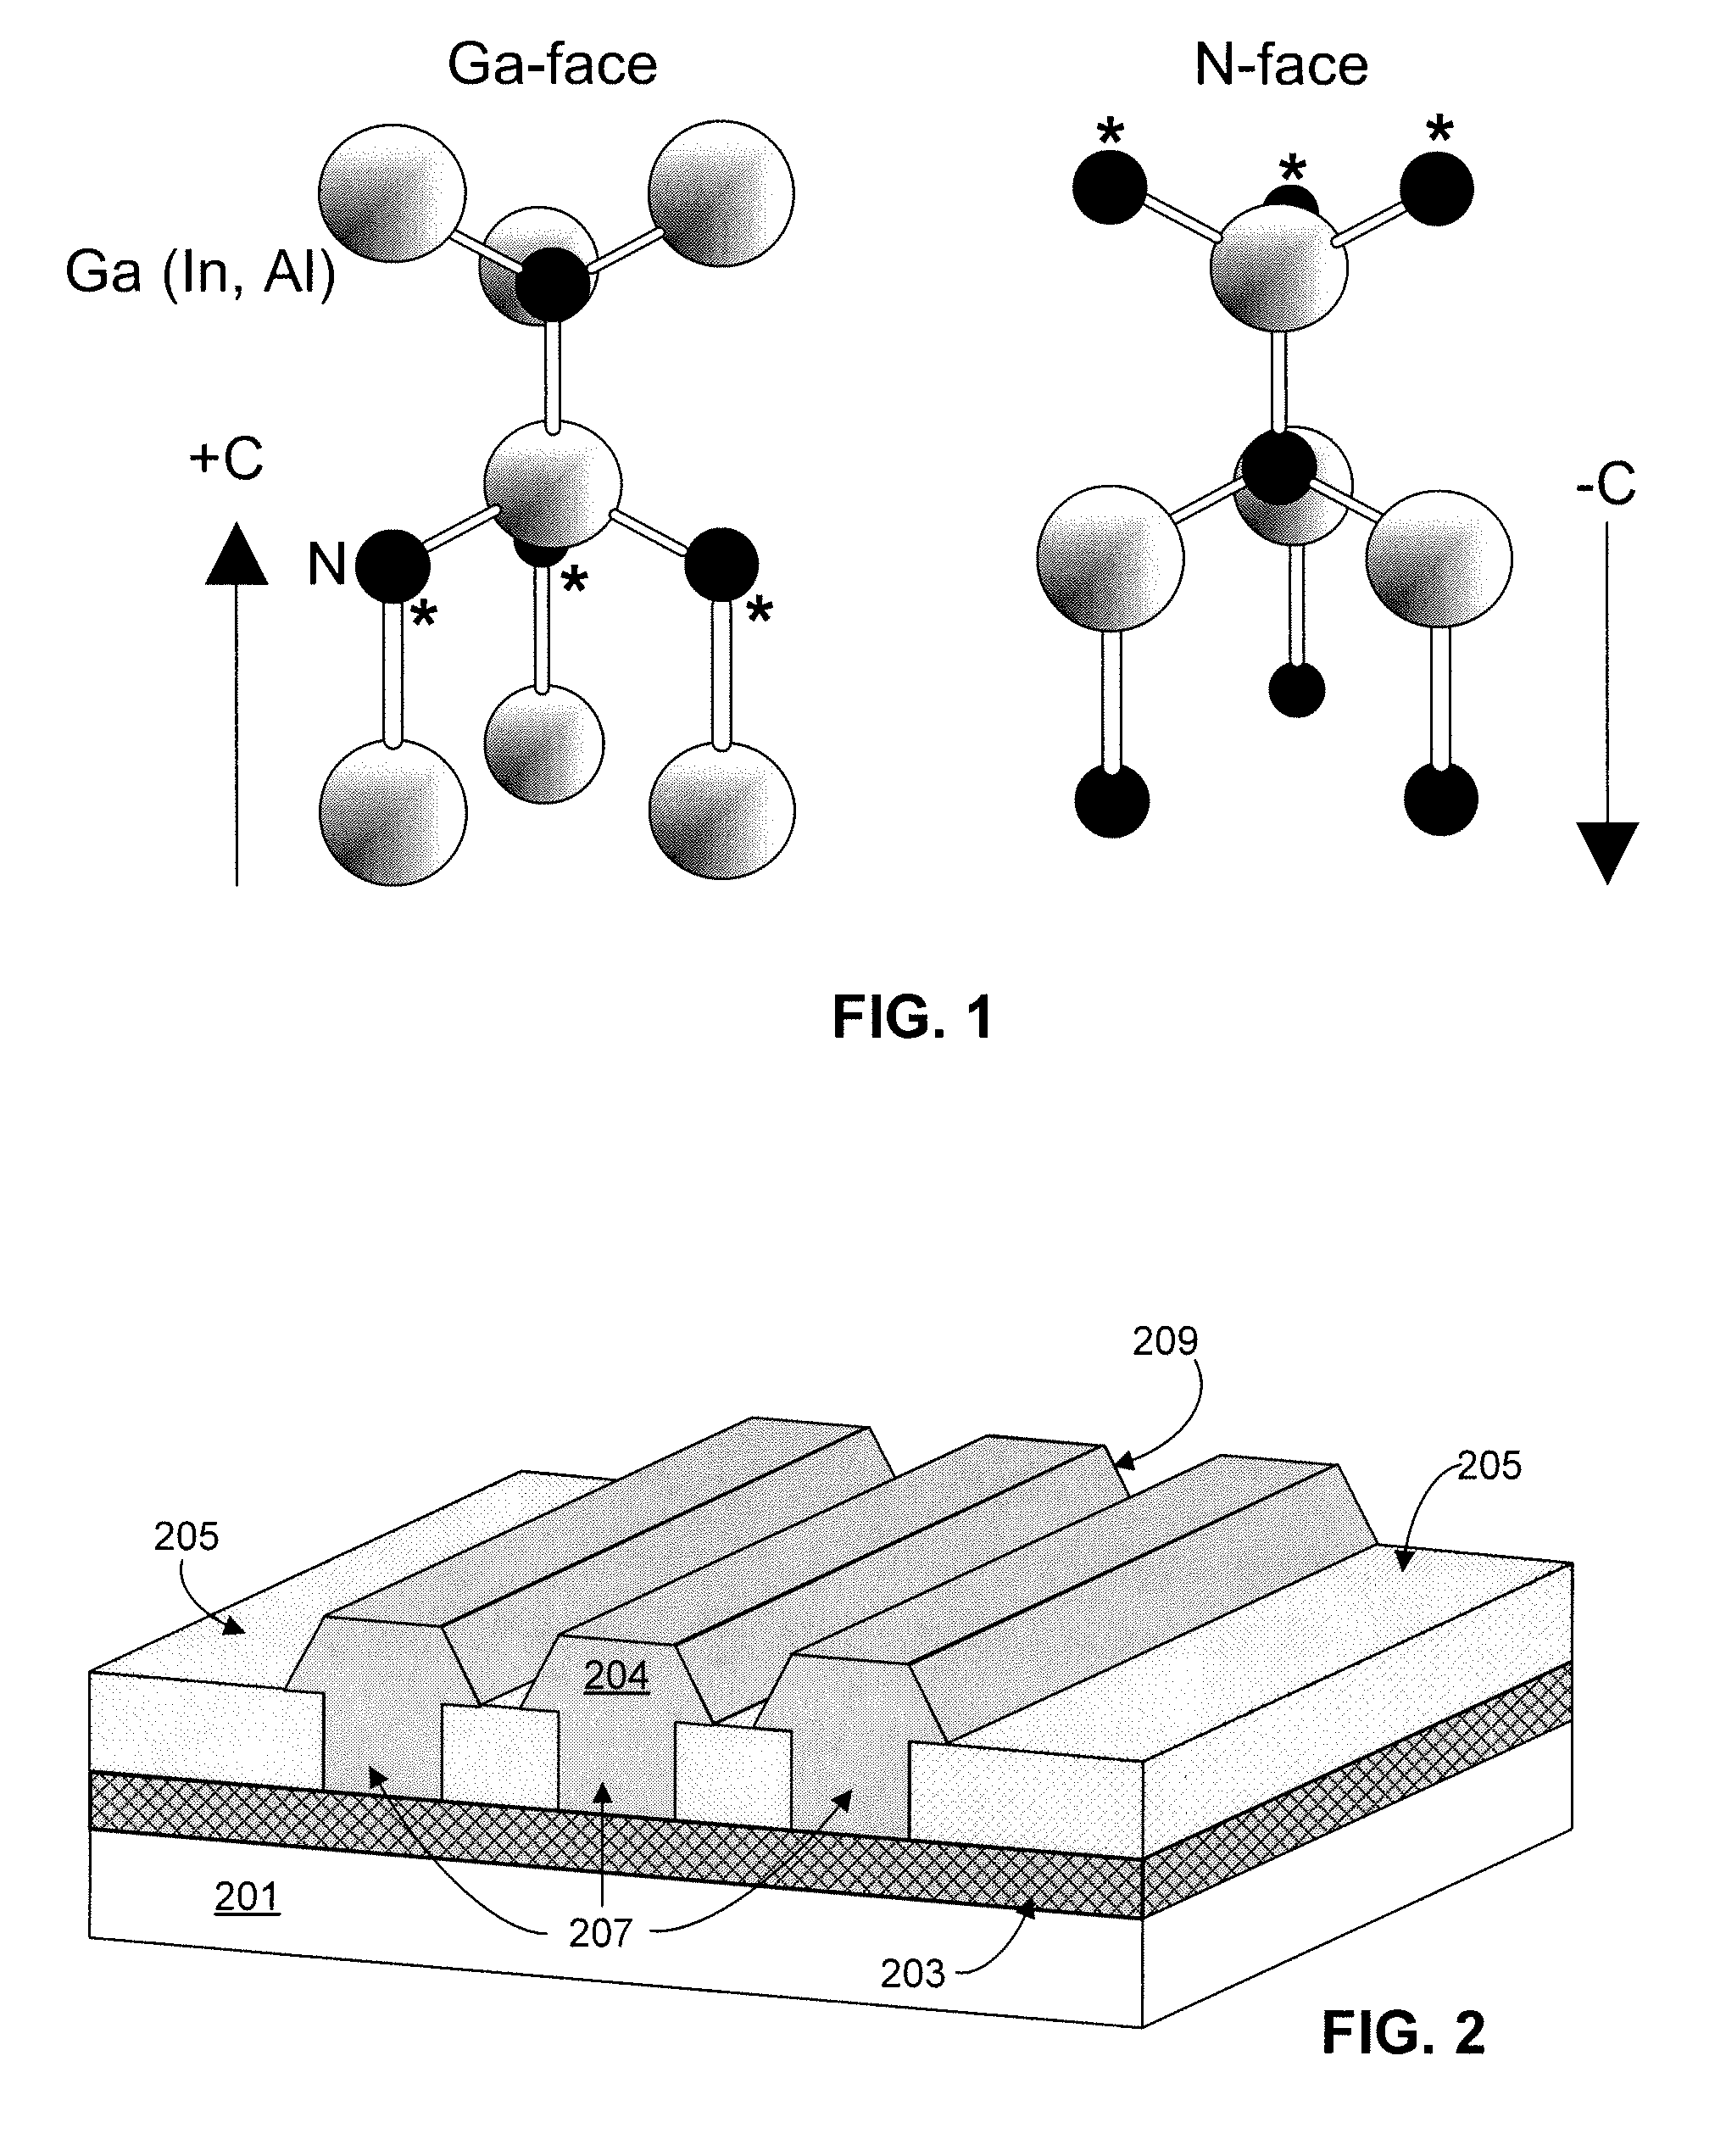 Epitaxial methods and templates grown by the methods